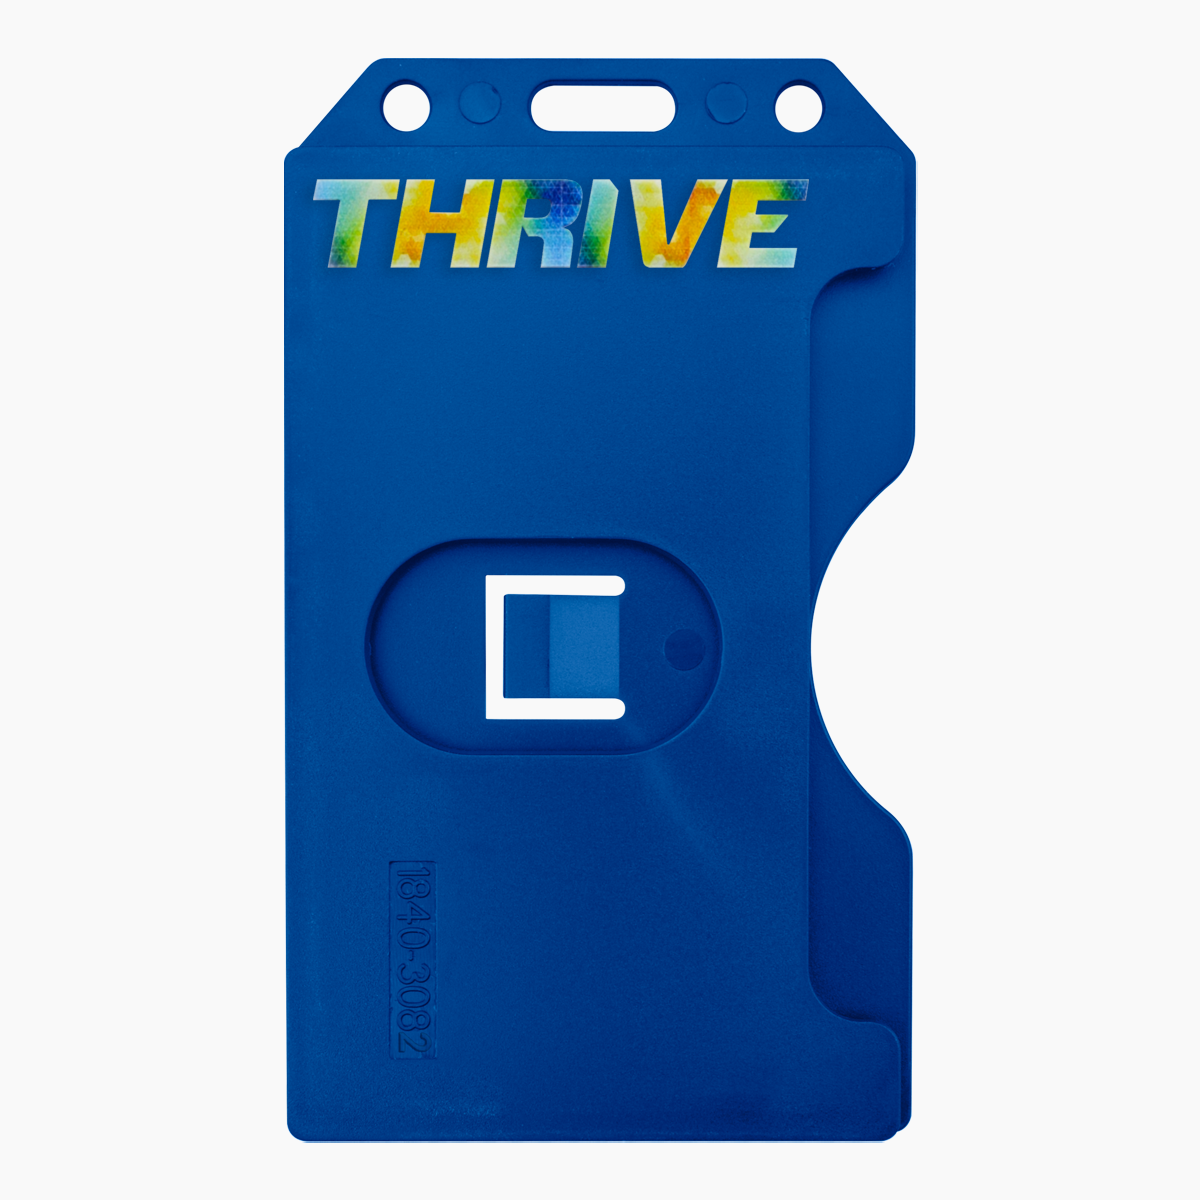 Blue Custom 2-Sided Rigid Vertical Multi-Card Holder (1840-308X) - Add Your Logo with a colorful "THRIVE" inscription at the top, featuring a cutout thumb slot for easy card retrieval and a professional look that enhances brand recognition.